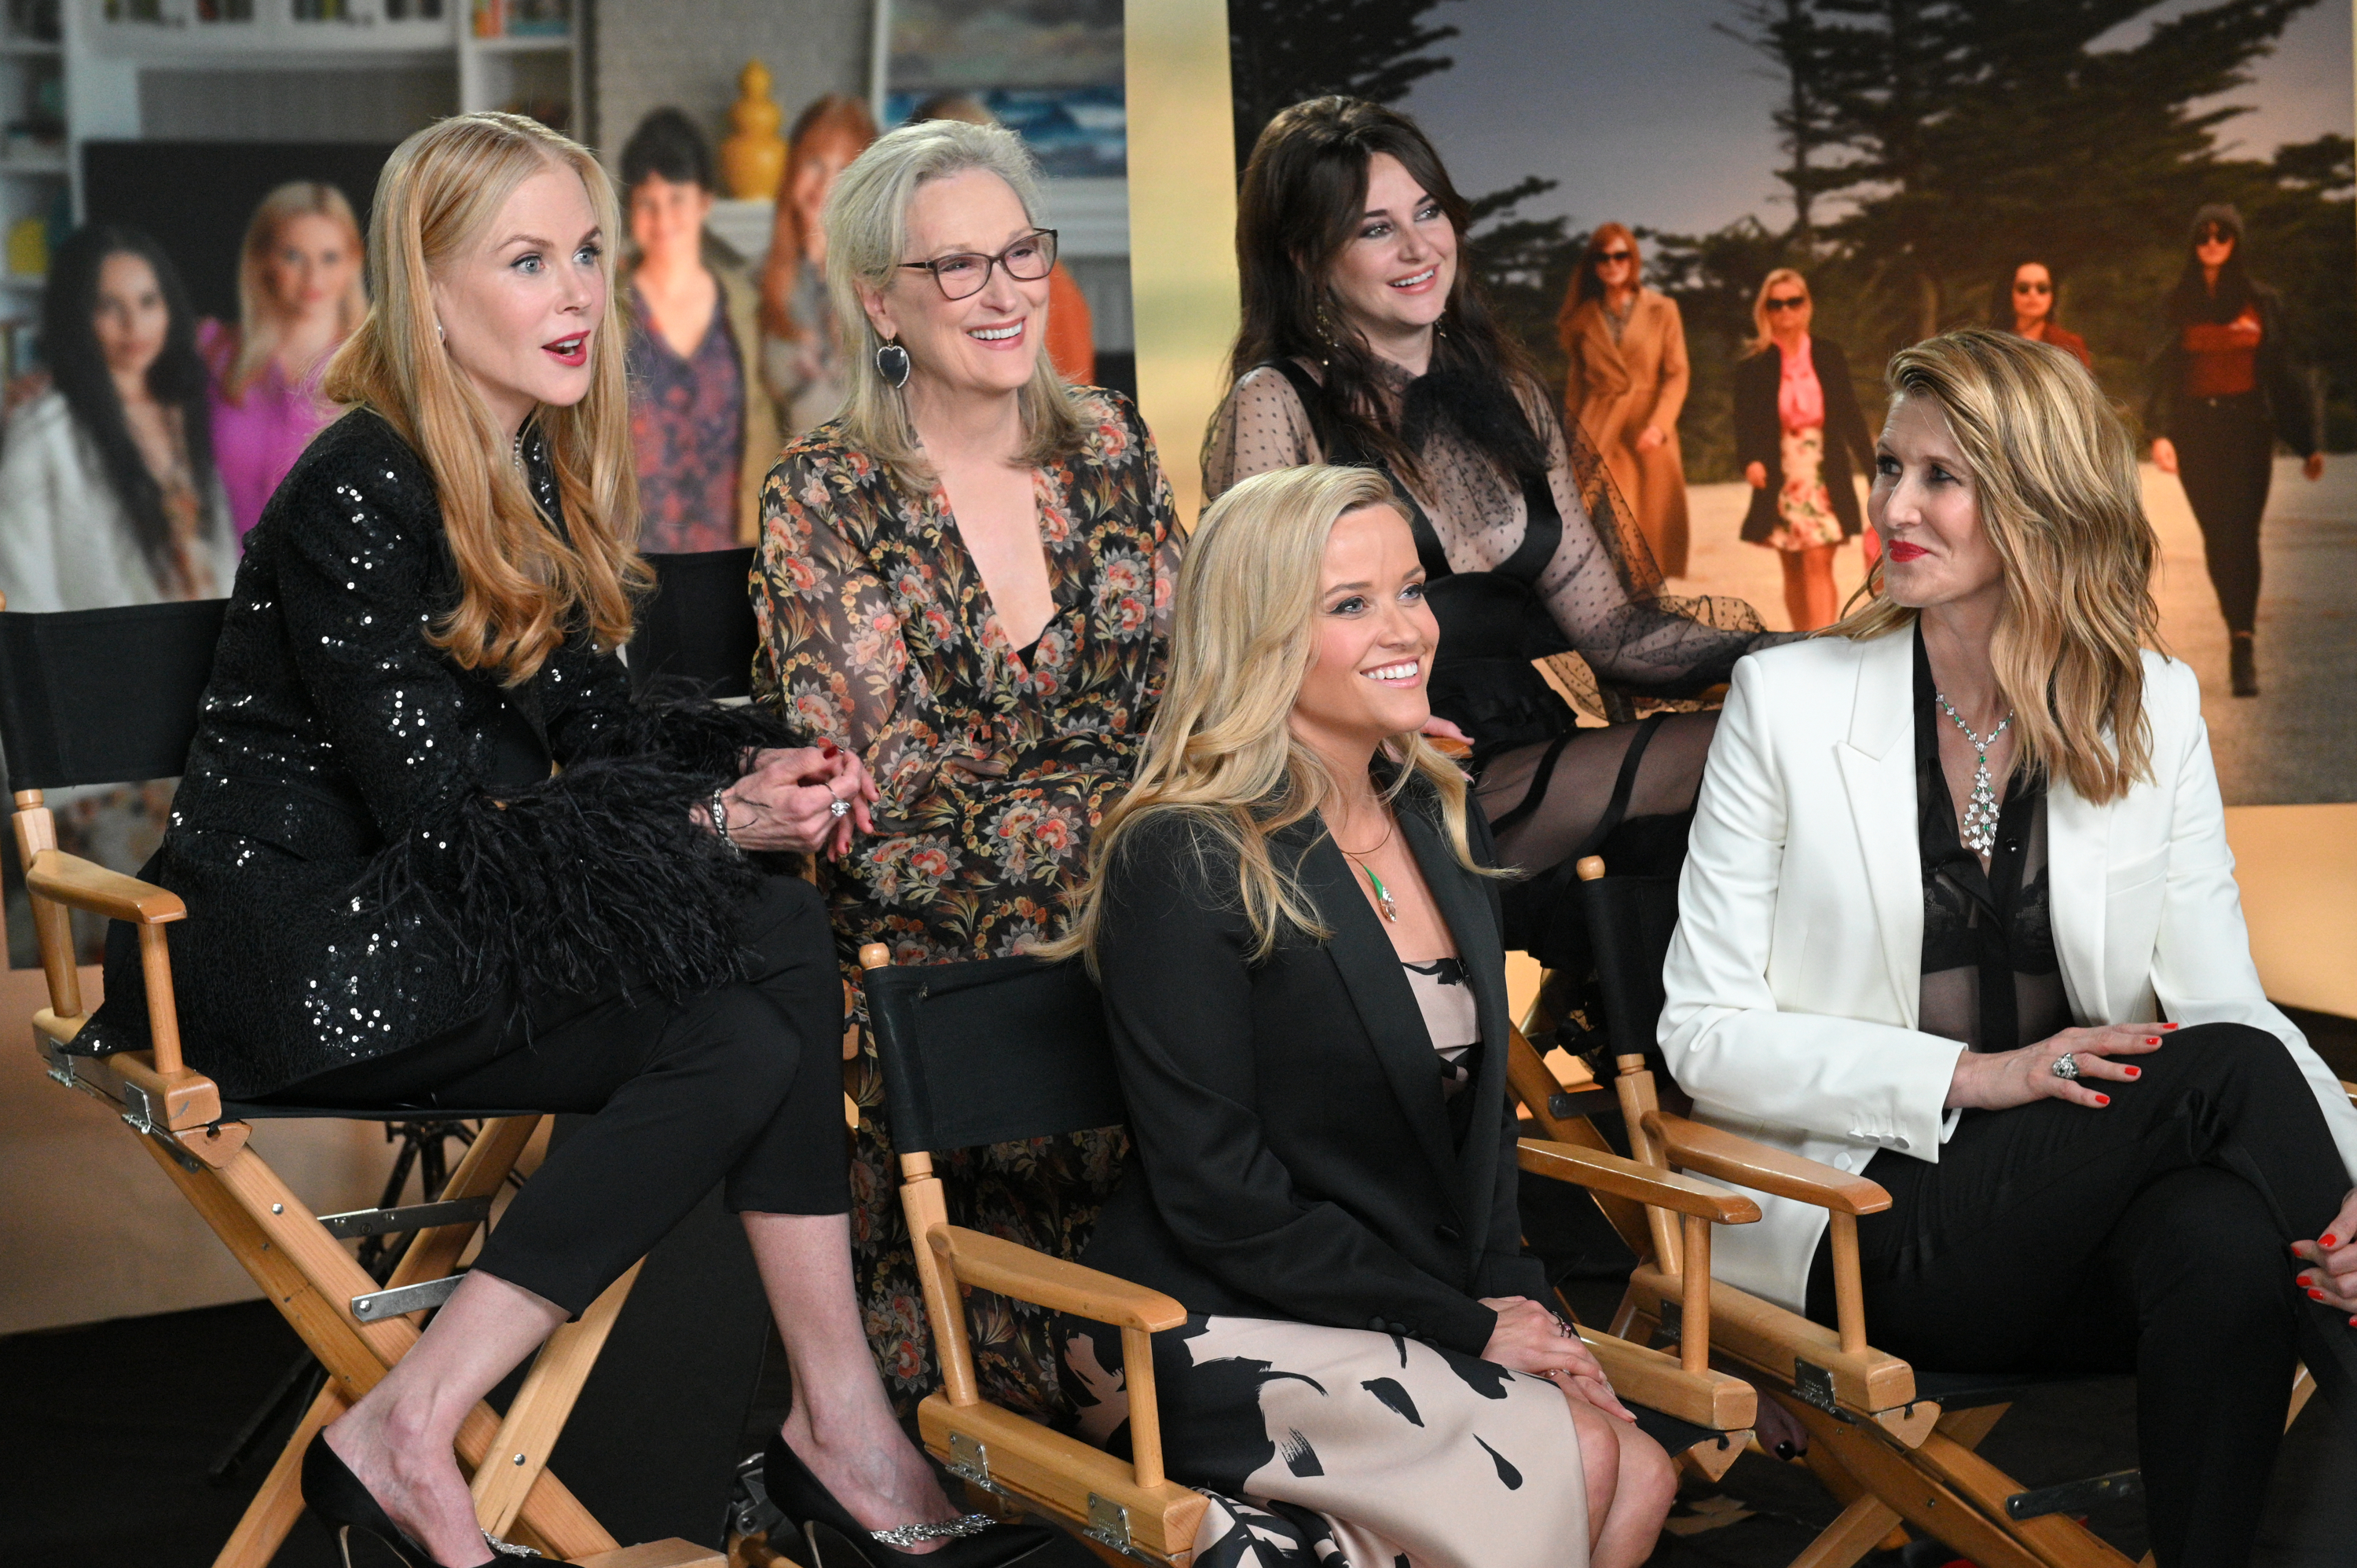 Four of the costars, plus Meryl, sitting together and smiling